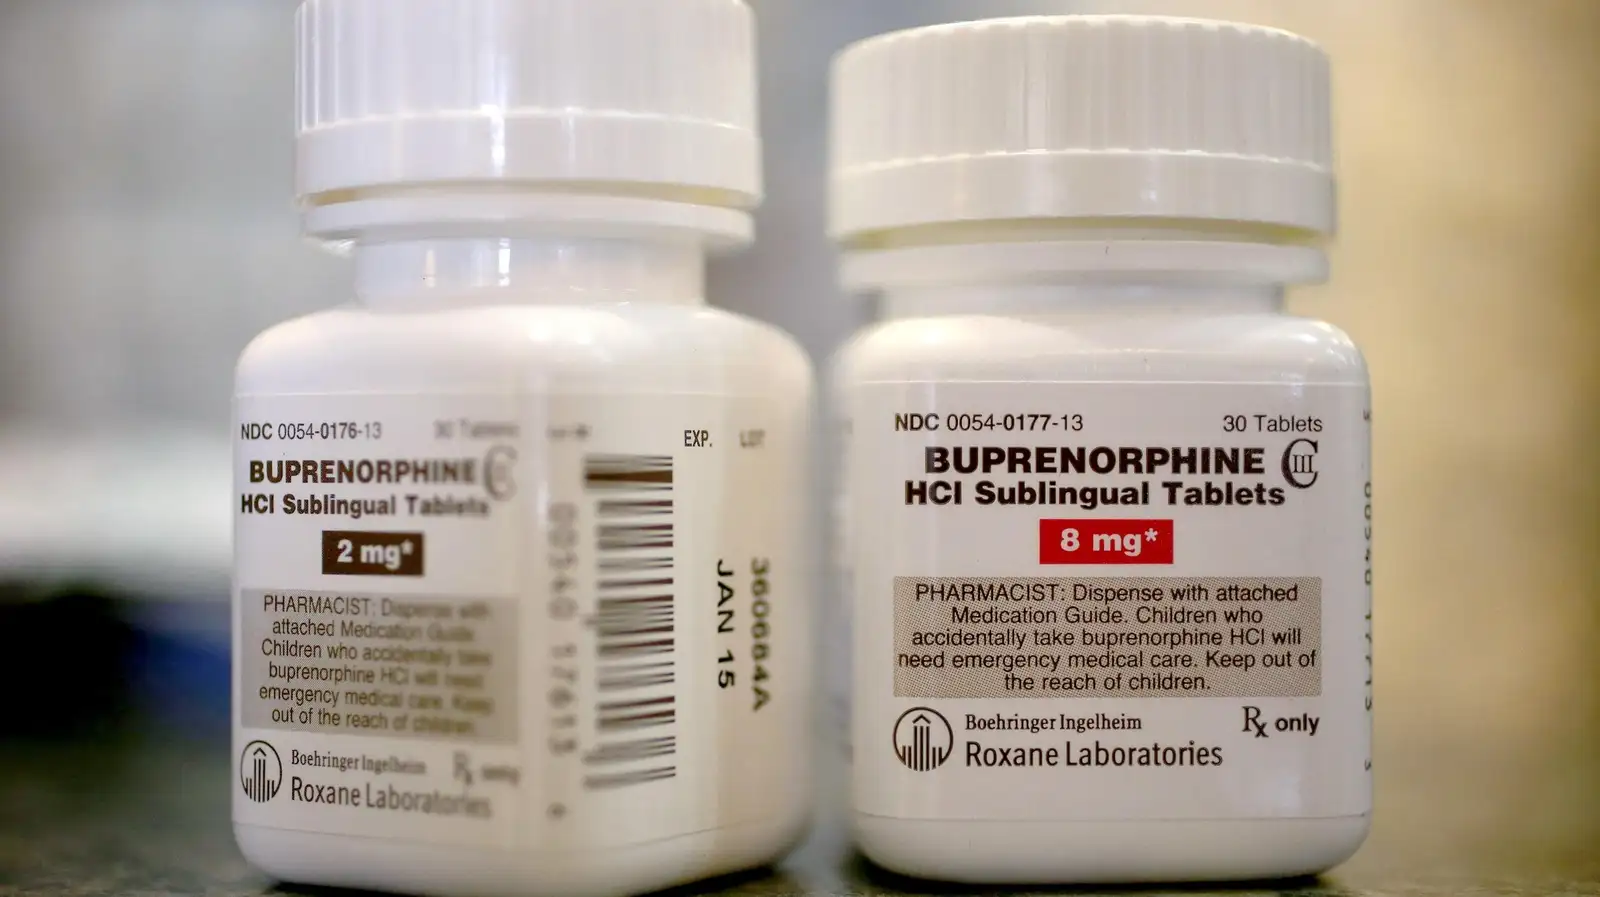 The US is about to make opioid addiction treatment much easier